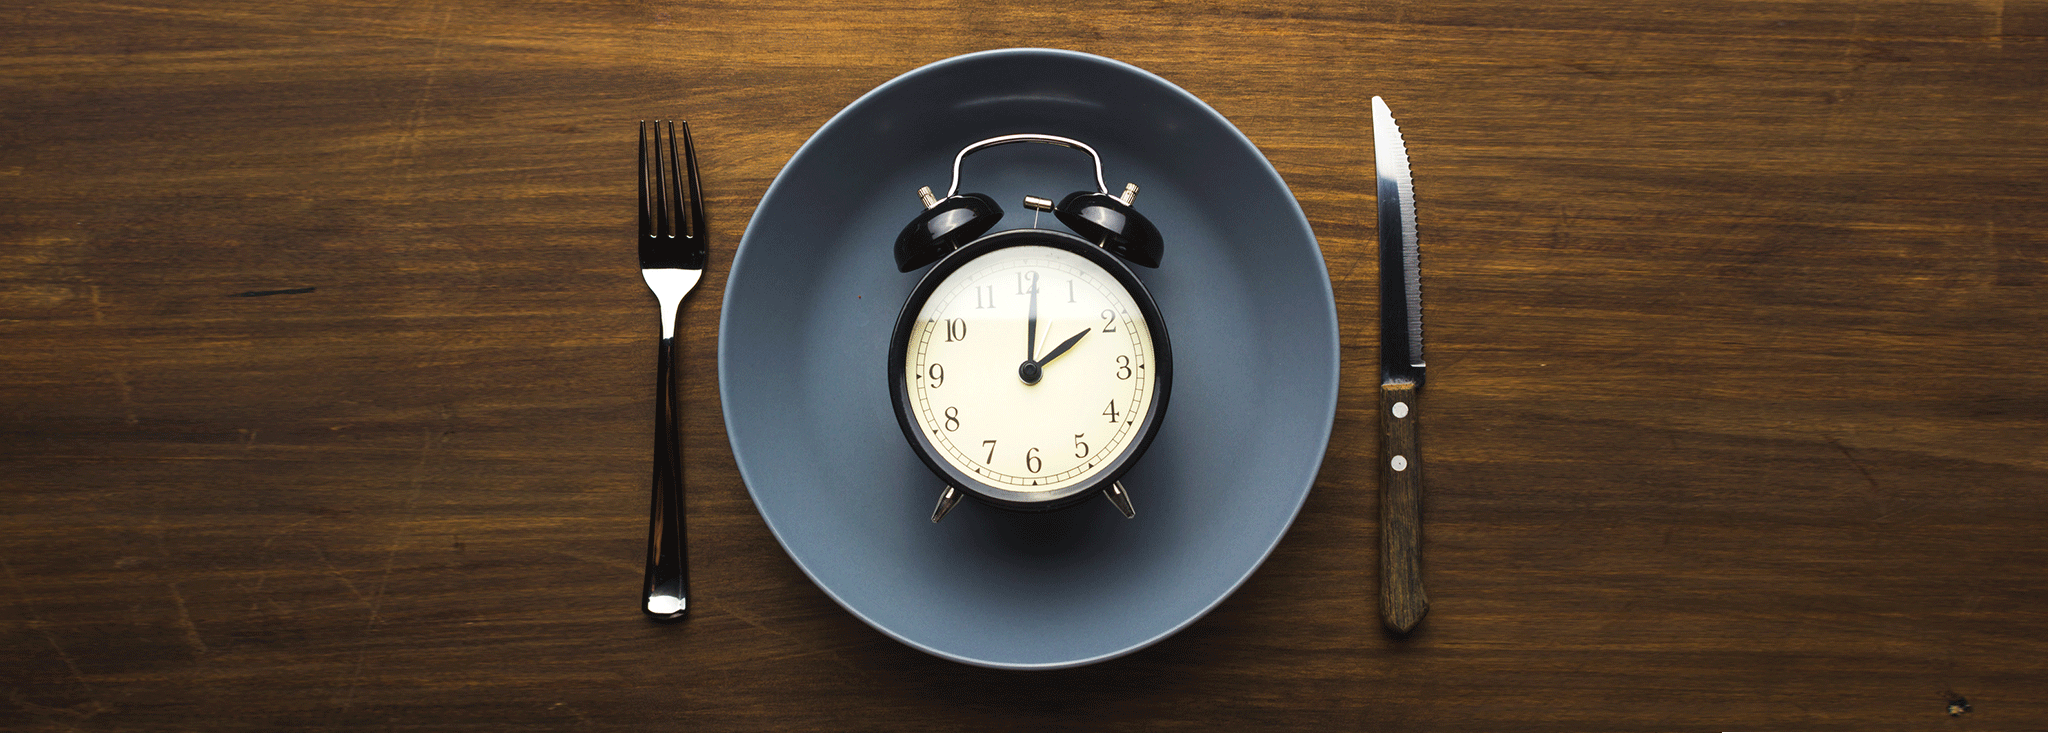 5 Tips to Intermittent Fasting!